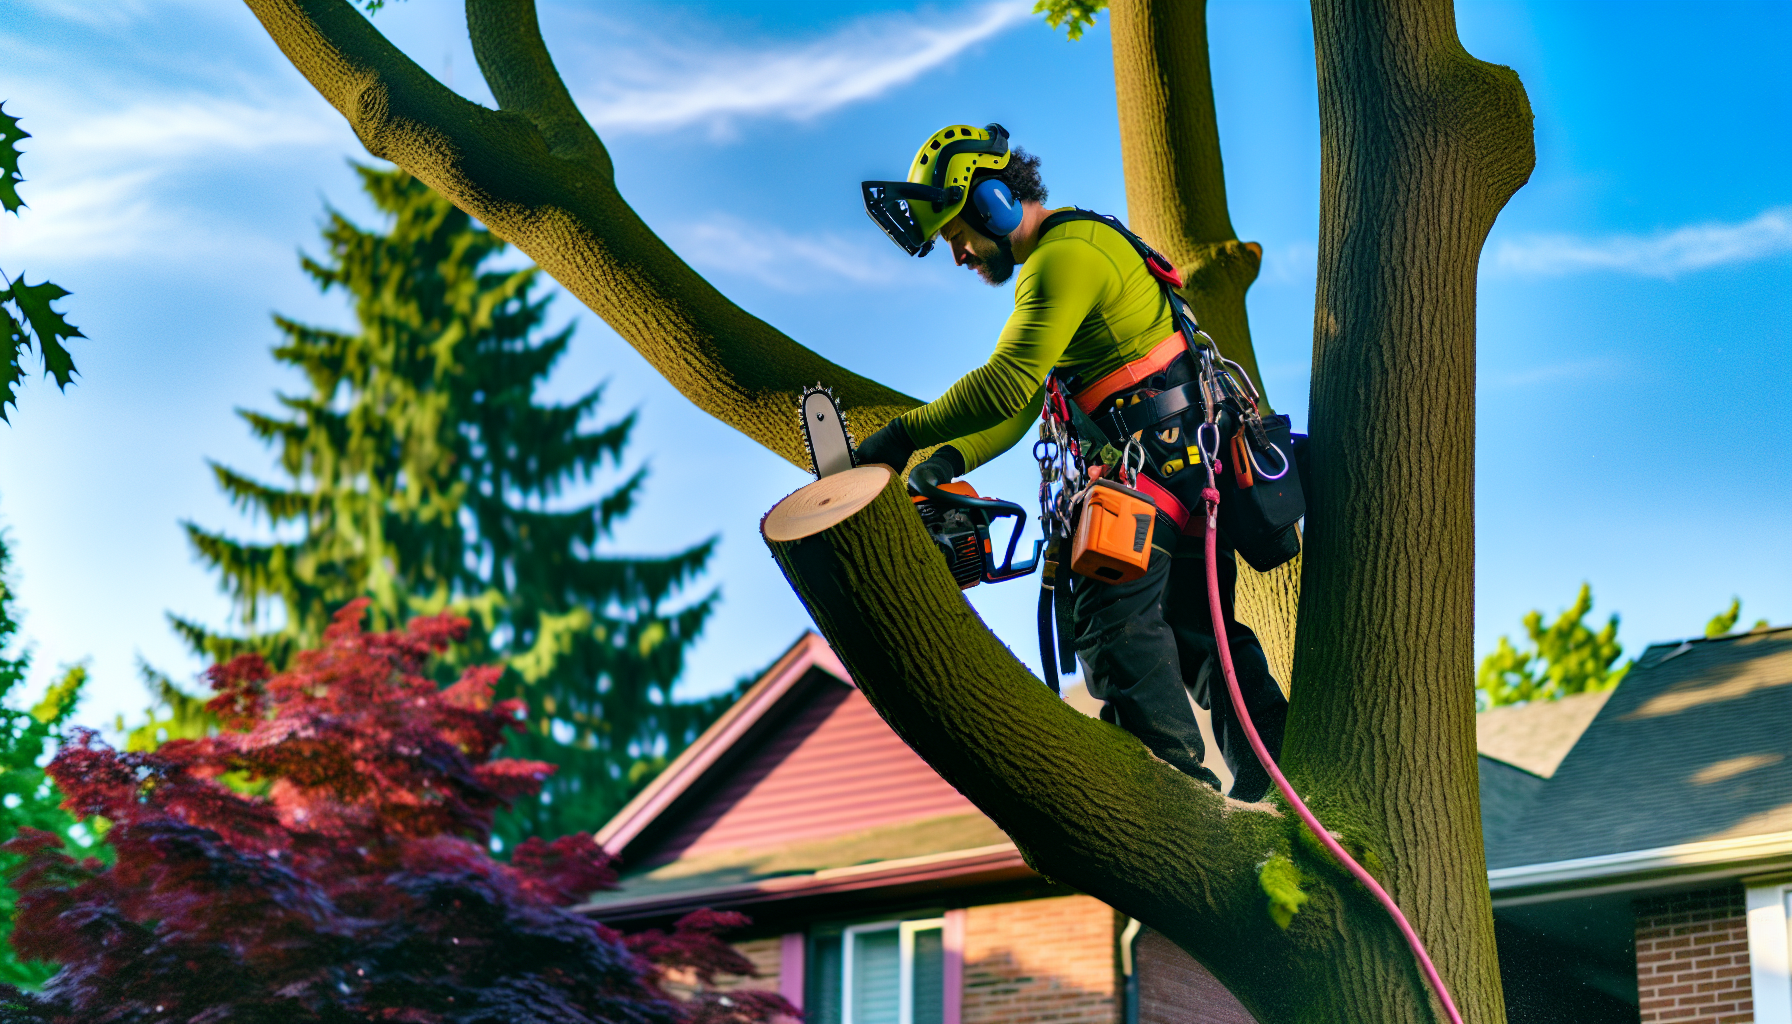 Professional tree service provider pruning branches